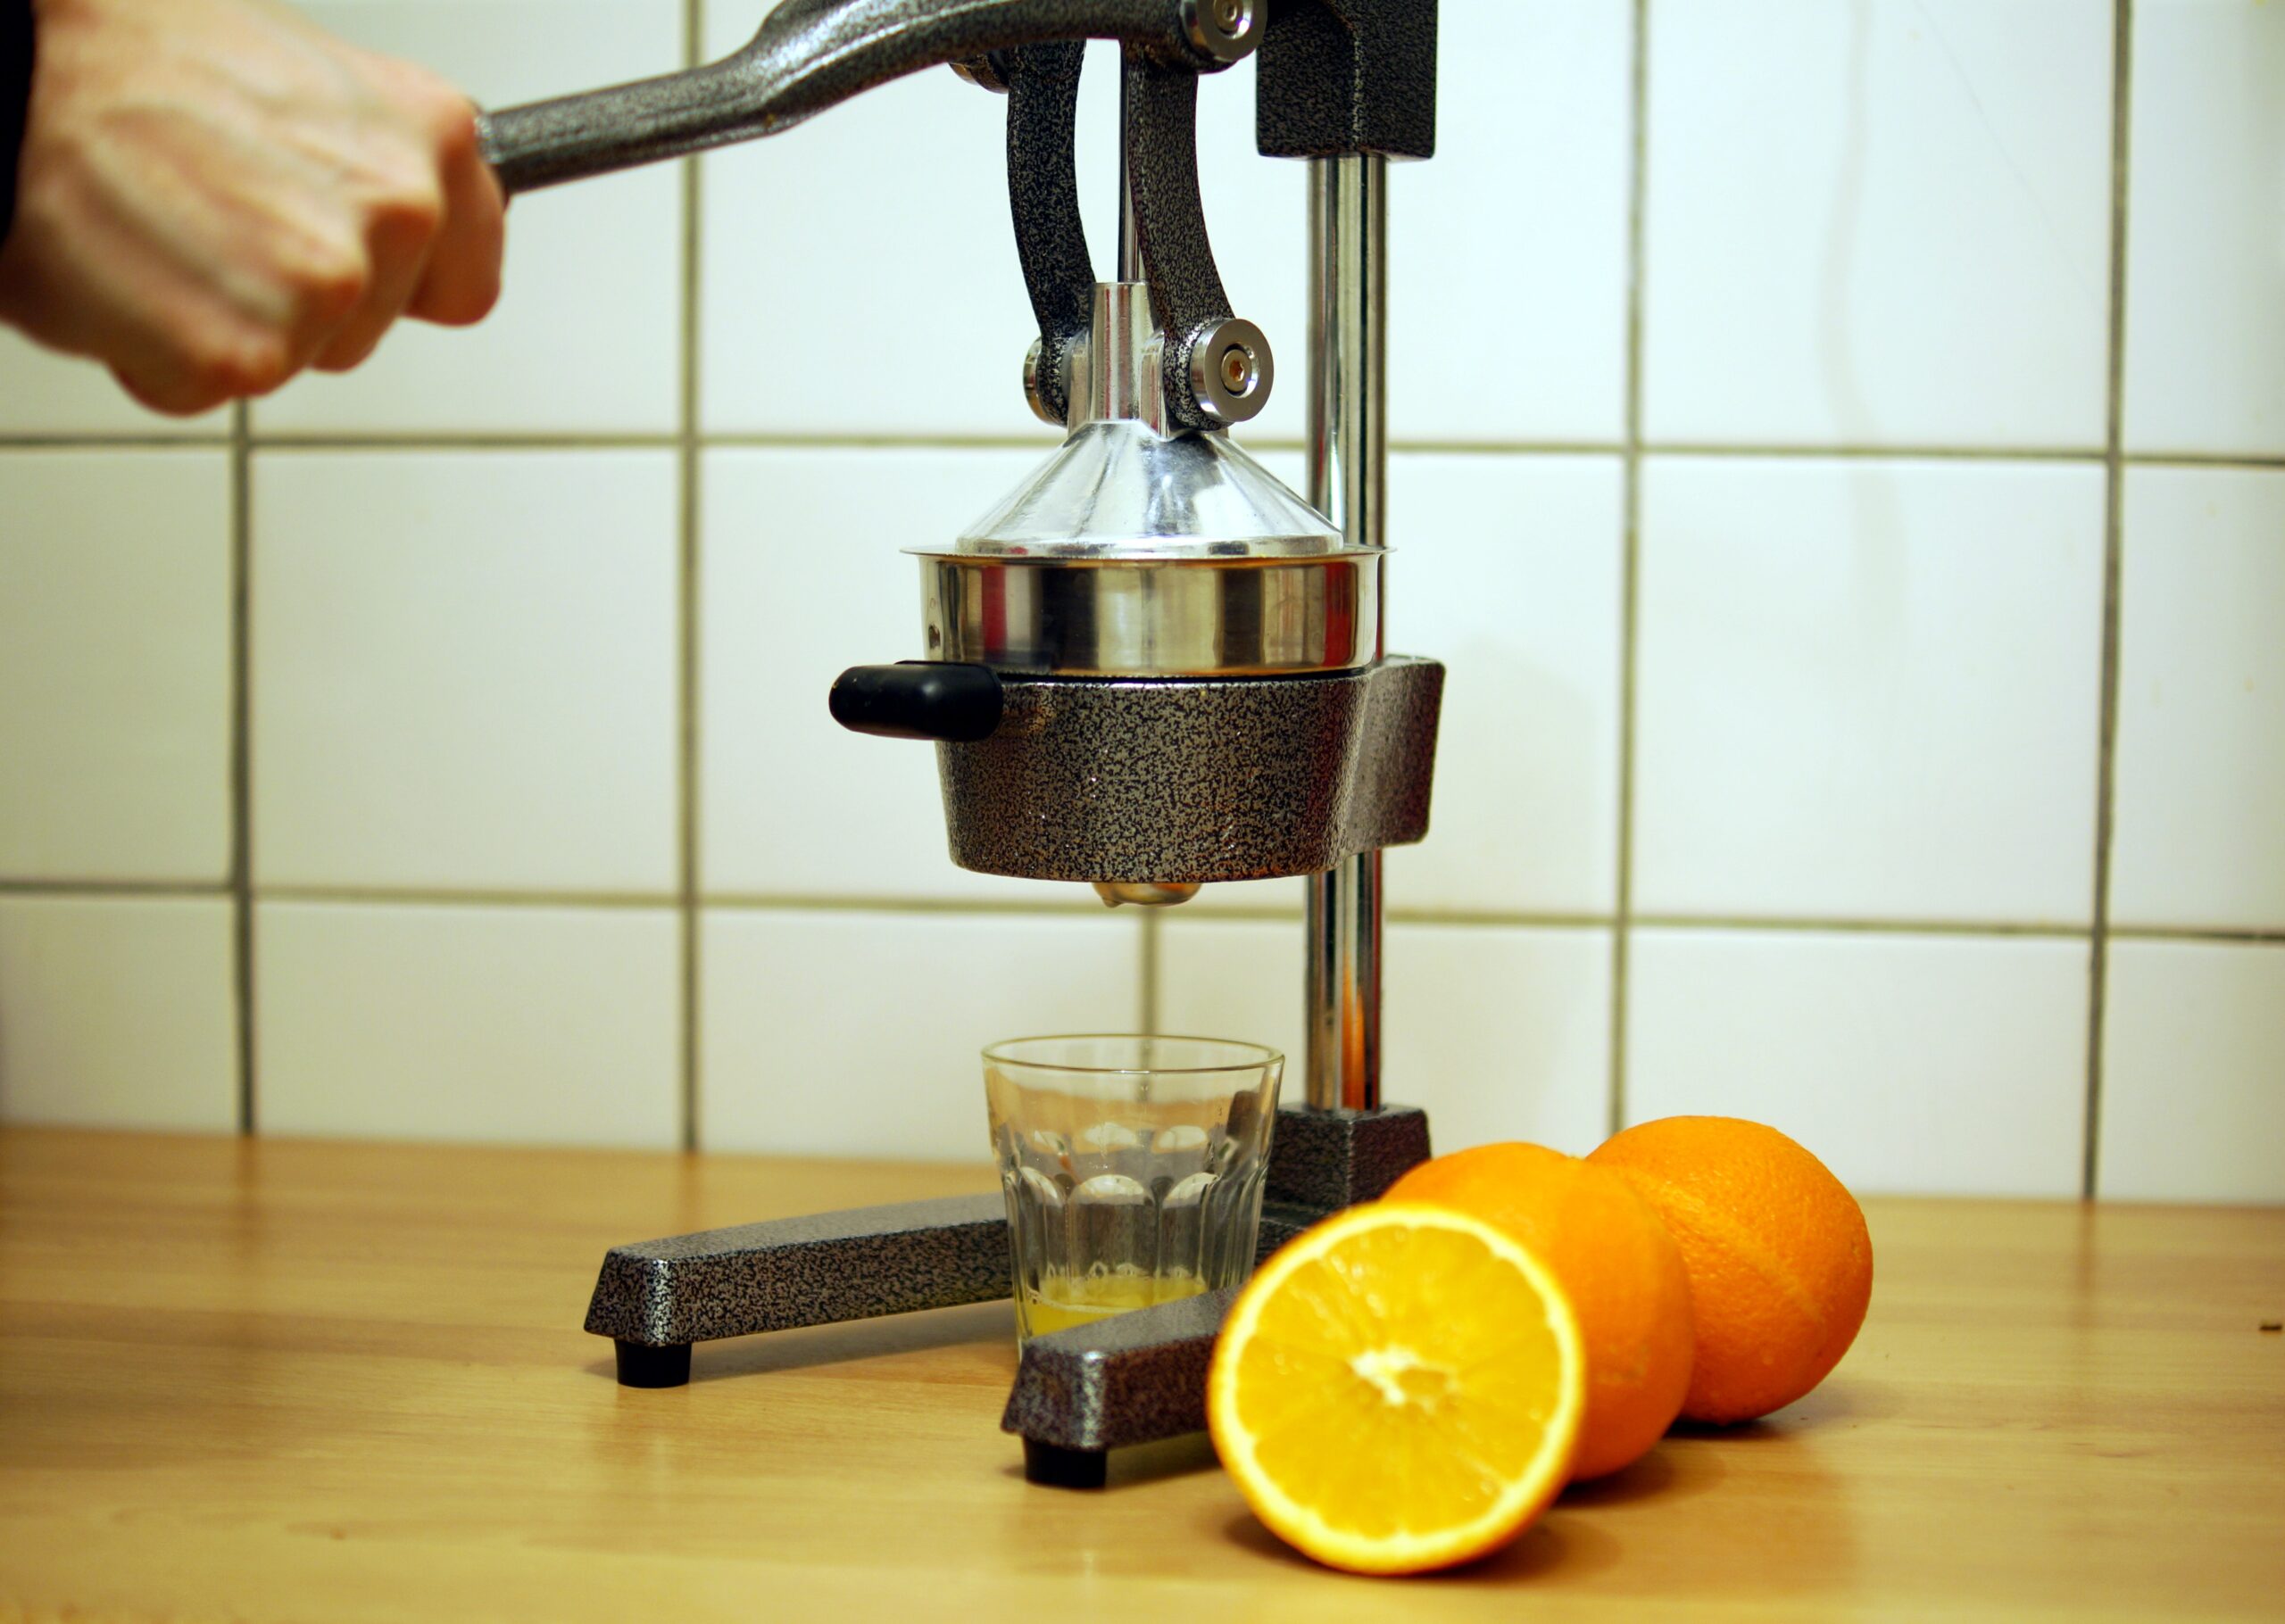 General Care and Cleaning Tips for Your Juicer